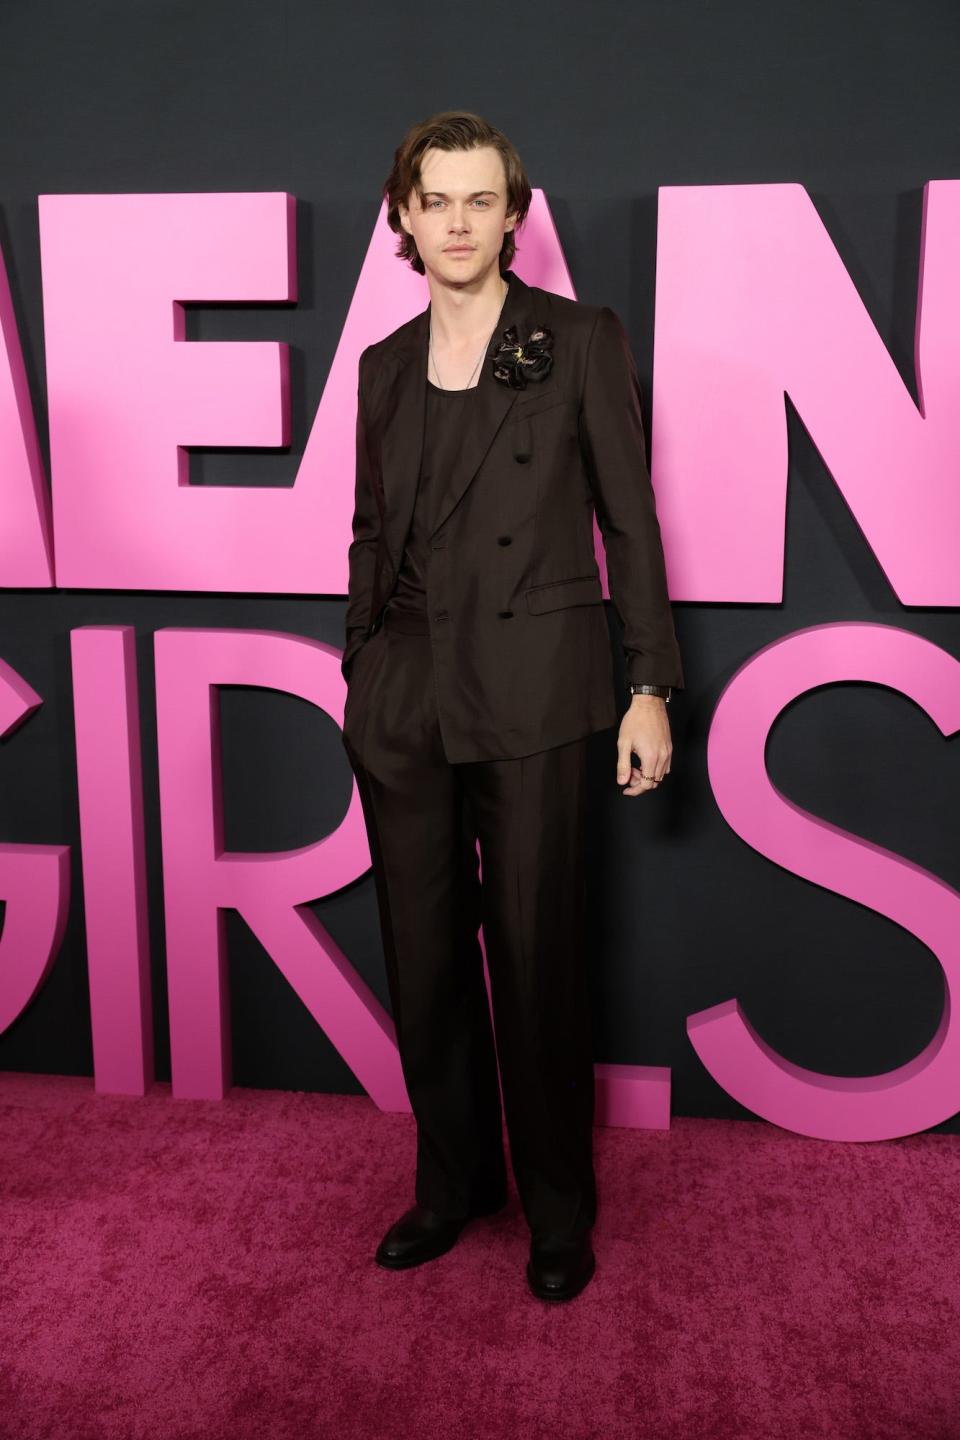 Christopher Briney attends the "Mean Girls" premiere.